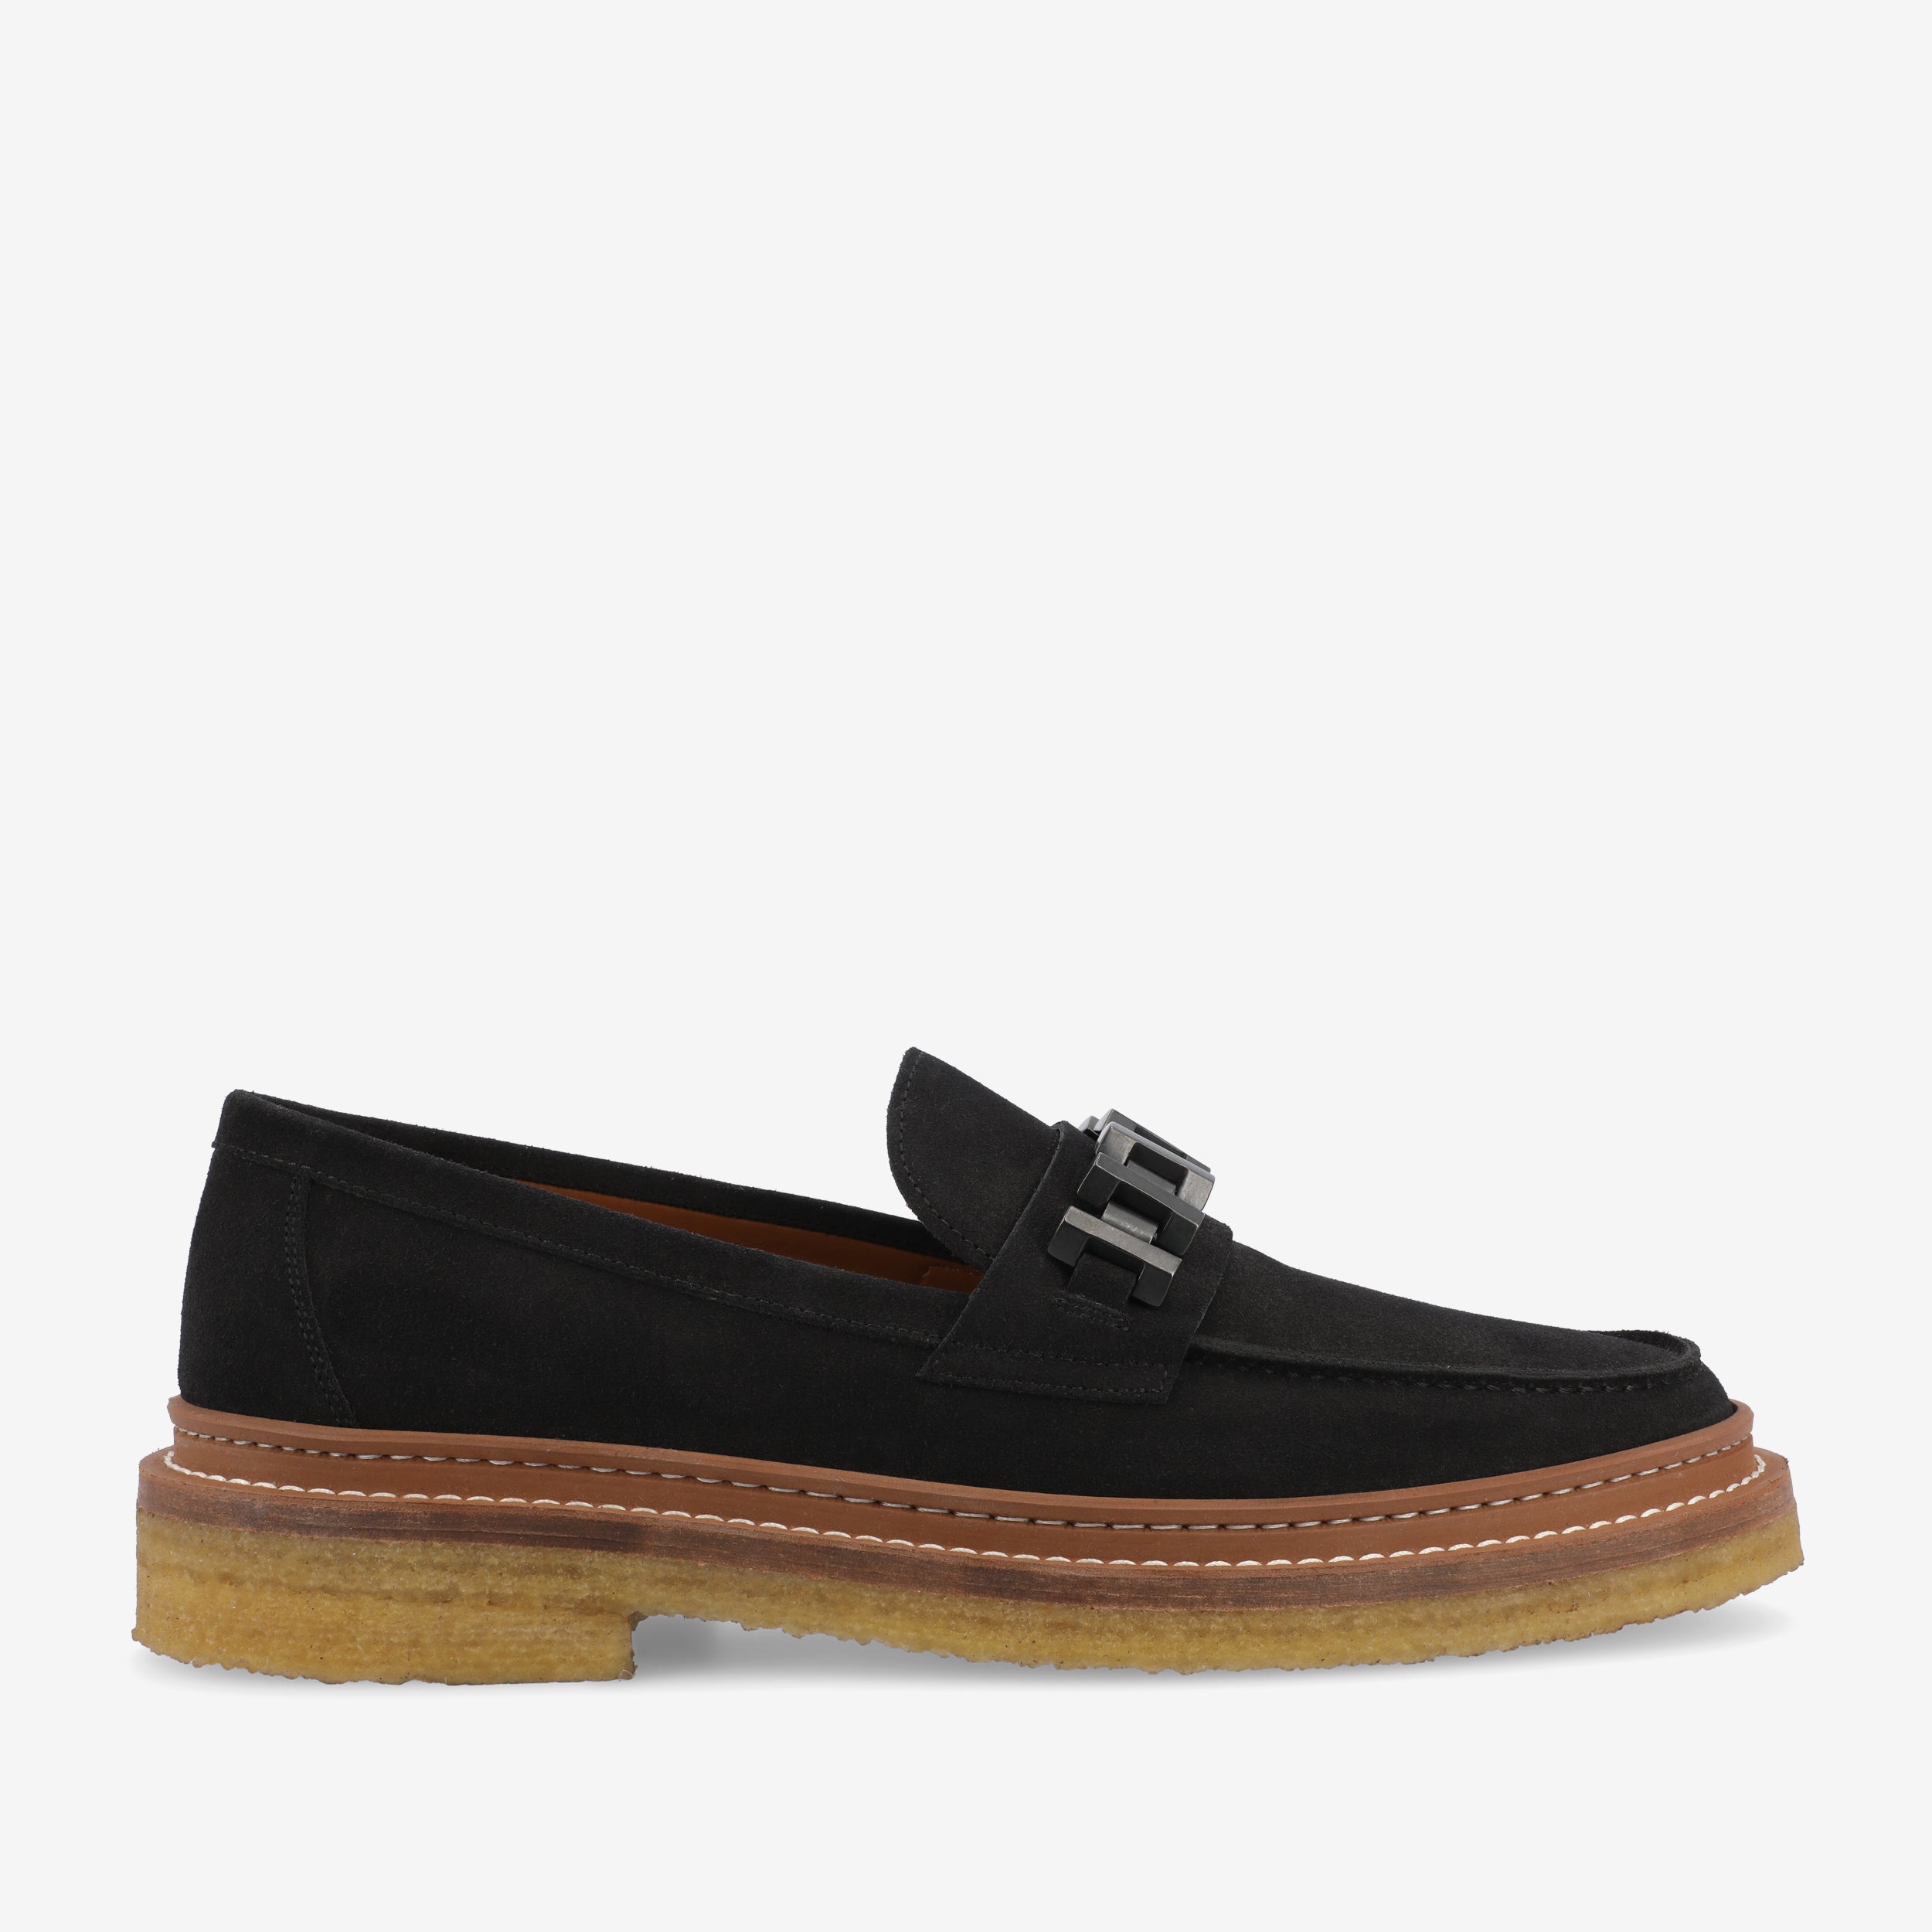 The Verona Loafer in Black (Last Chance, Final Sale)